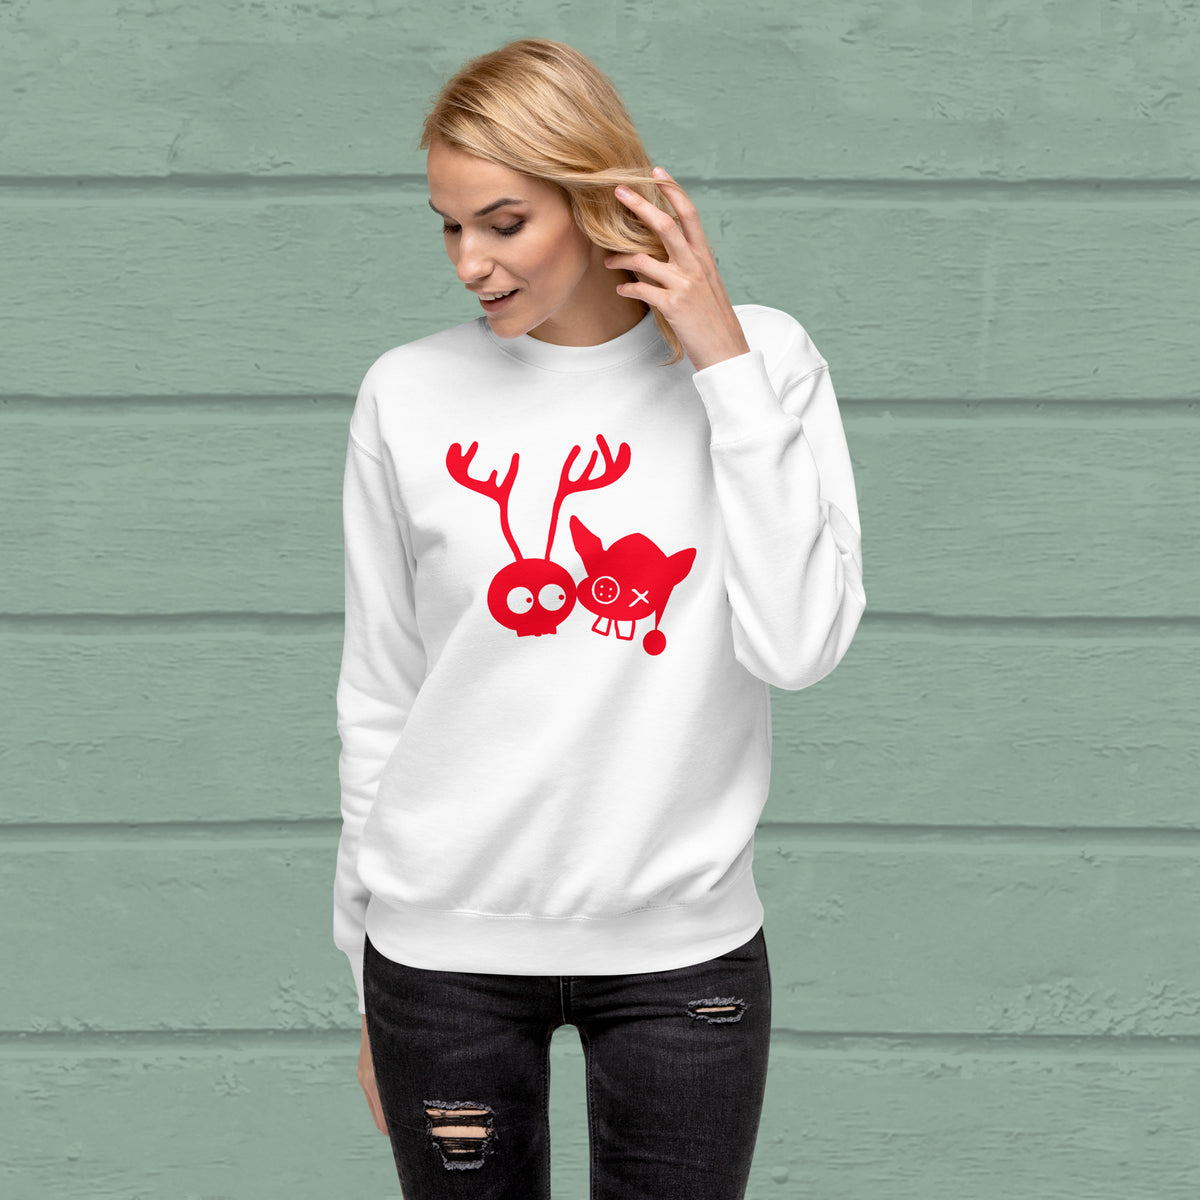 Classic Xmas Sweater, white/red